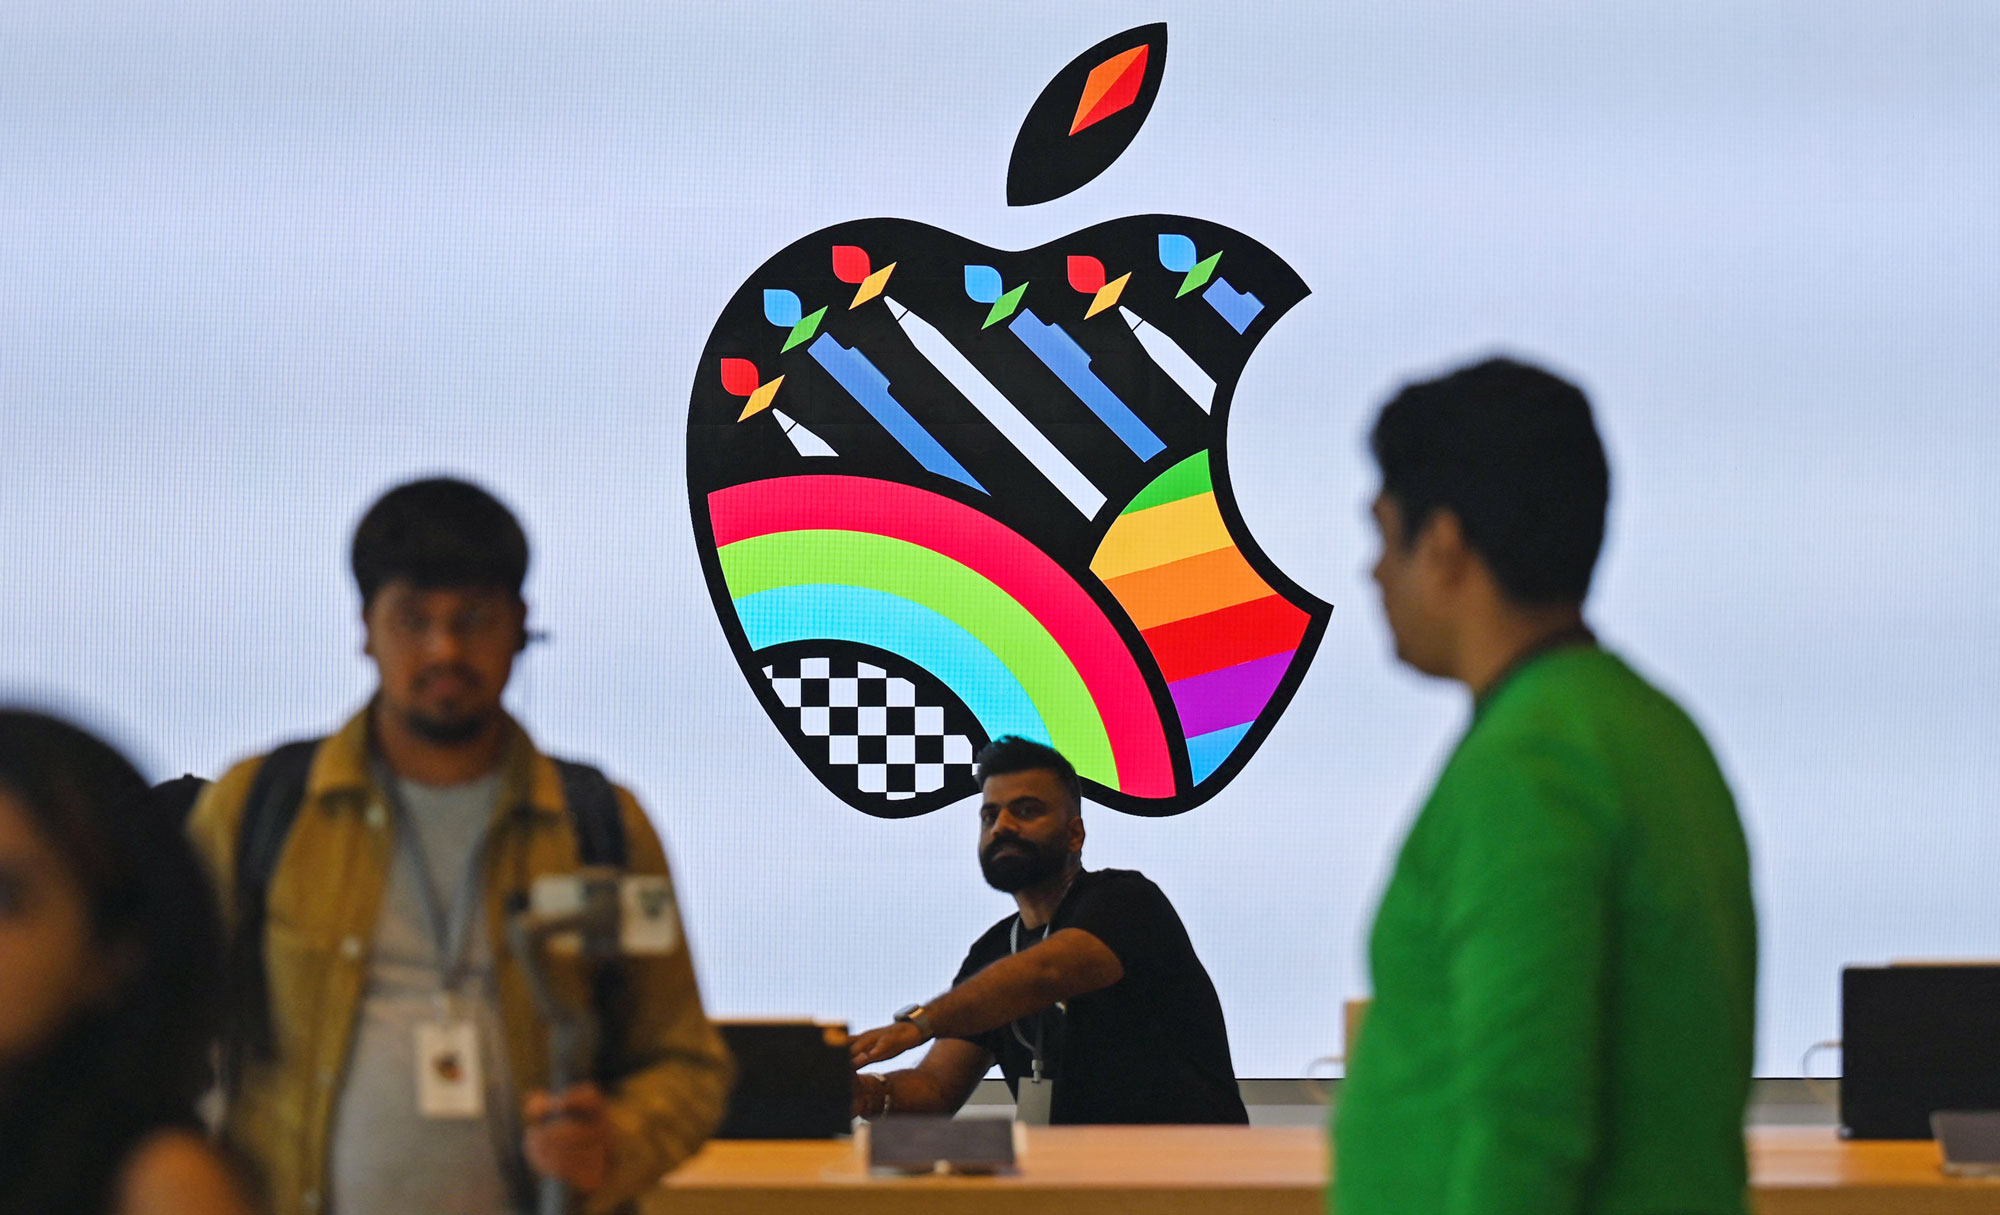 Apple has been dogged this year by concerns about stagnating revenue growth.